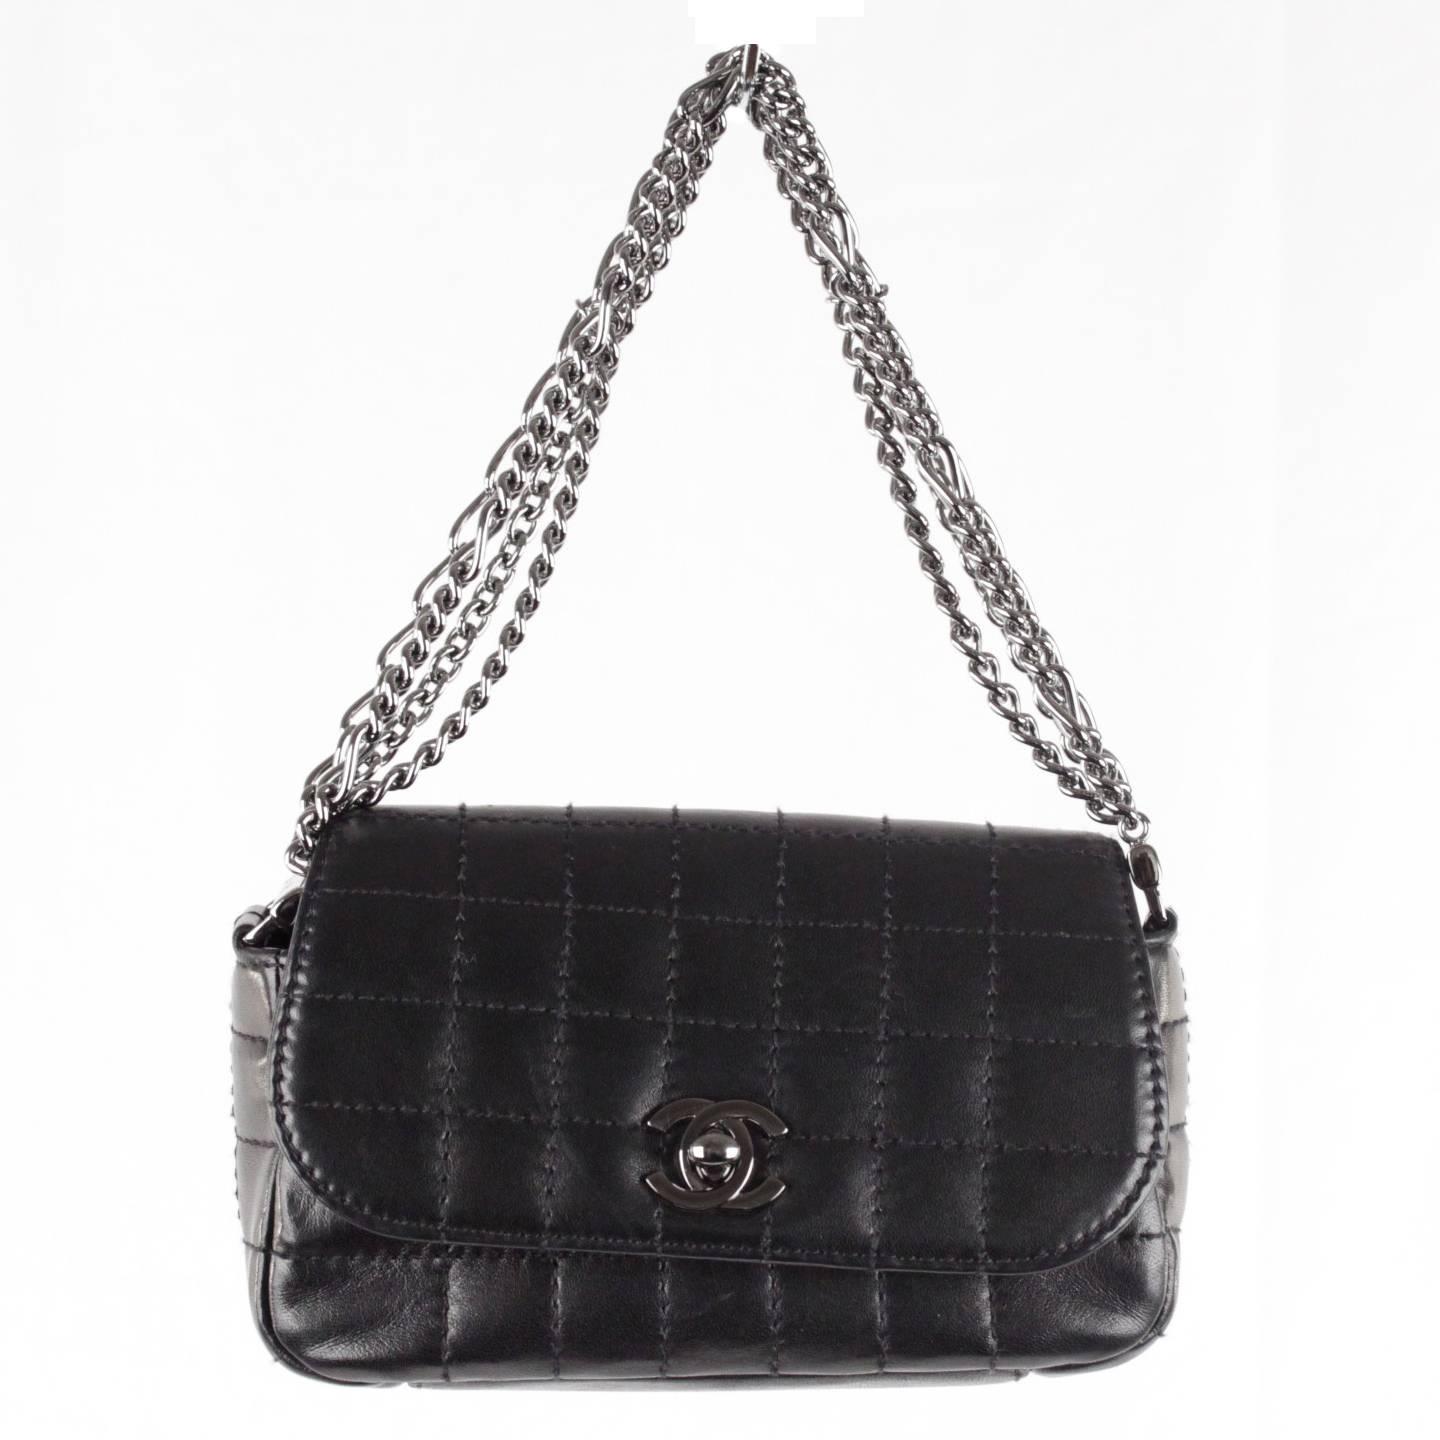 CHANEL Black Square Quilted Leather MINI Flap HANDBAG Multi Chain BAG For Sale at 1stdibs